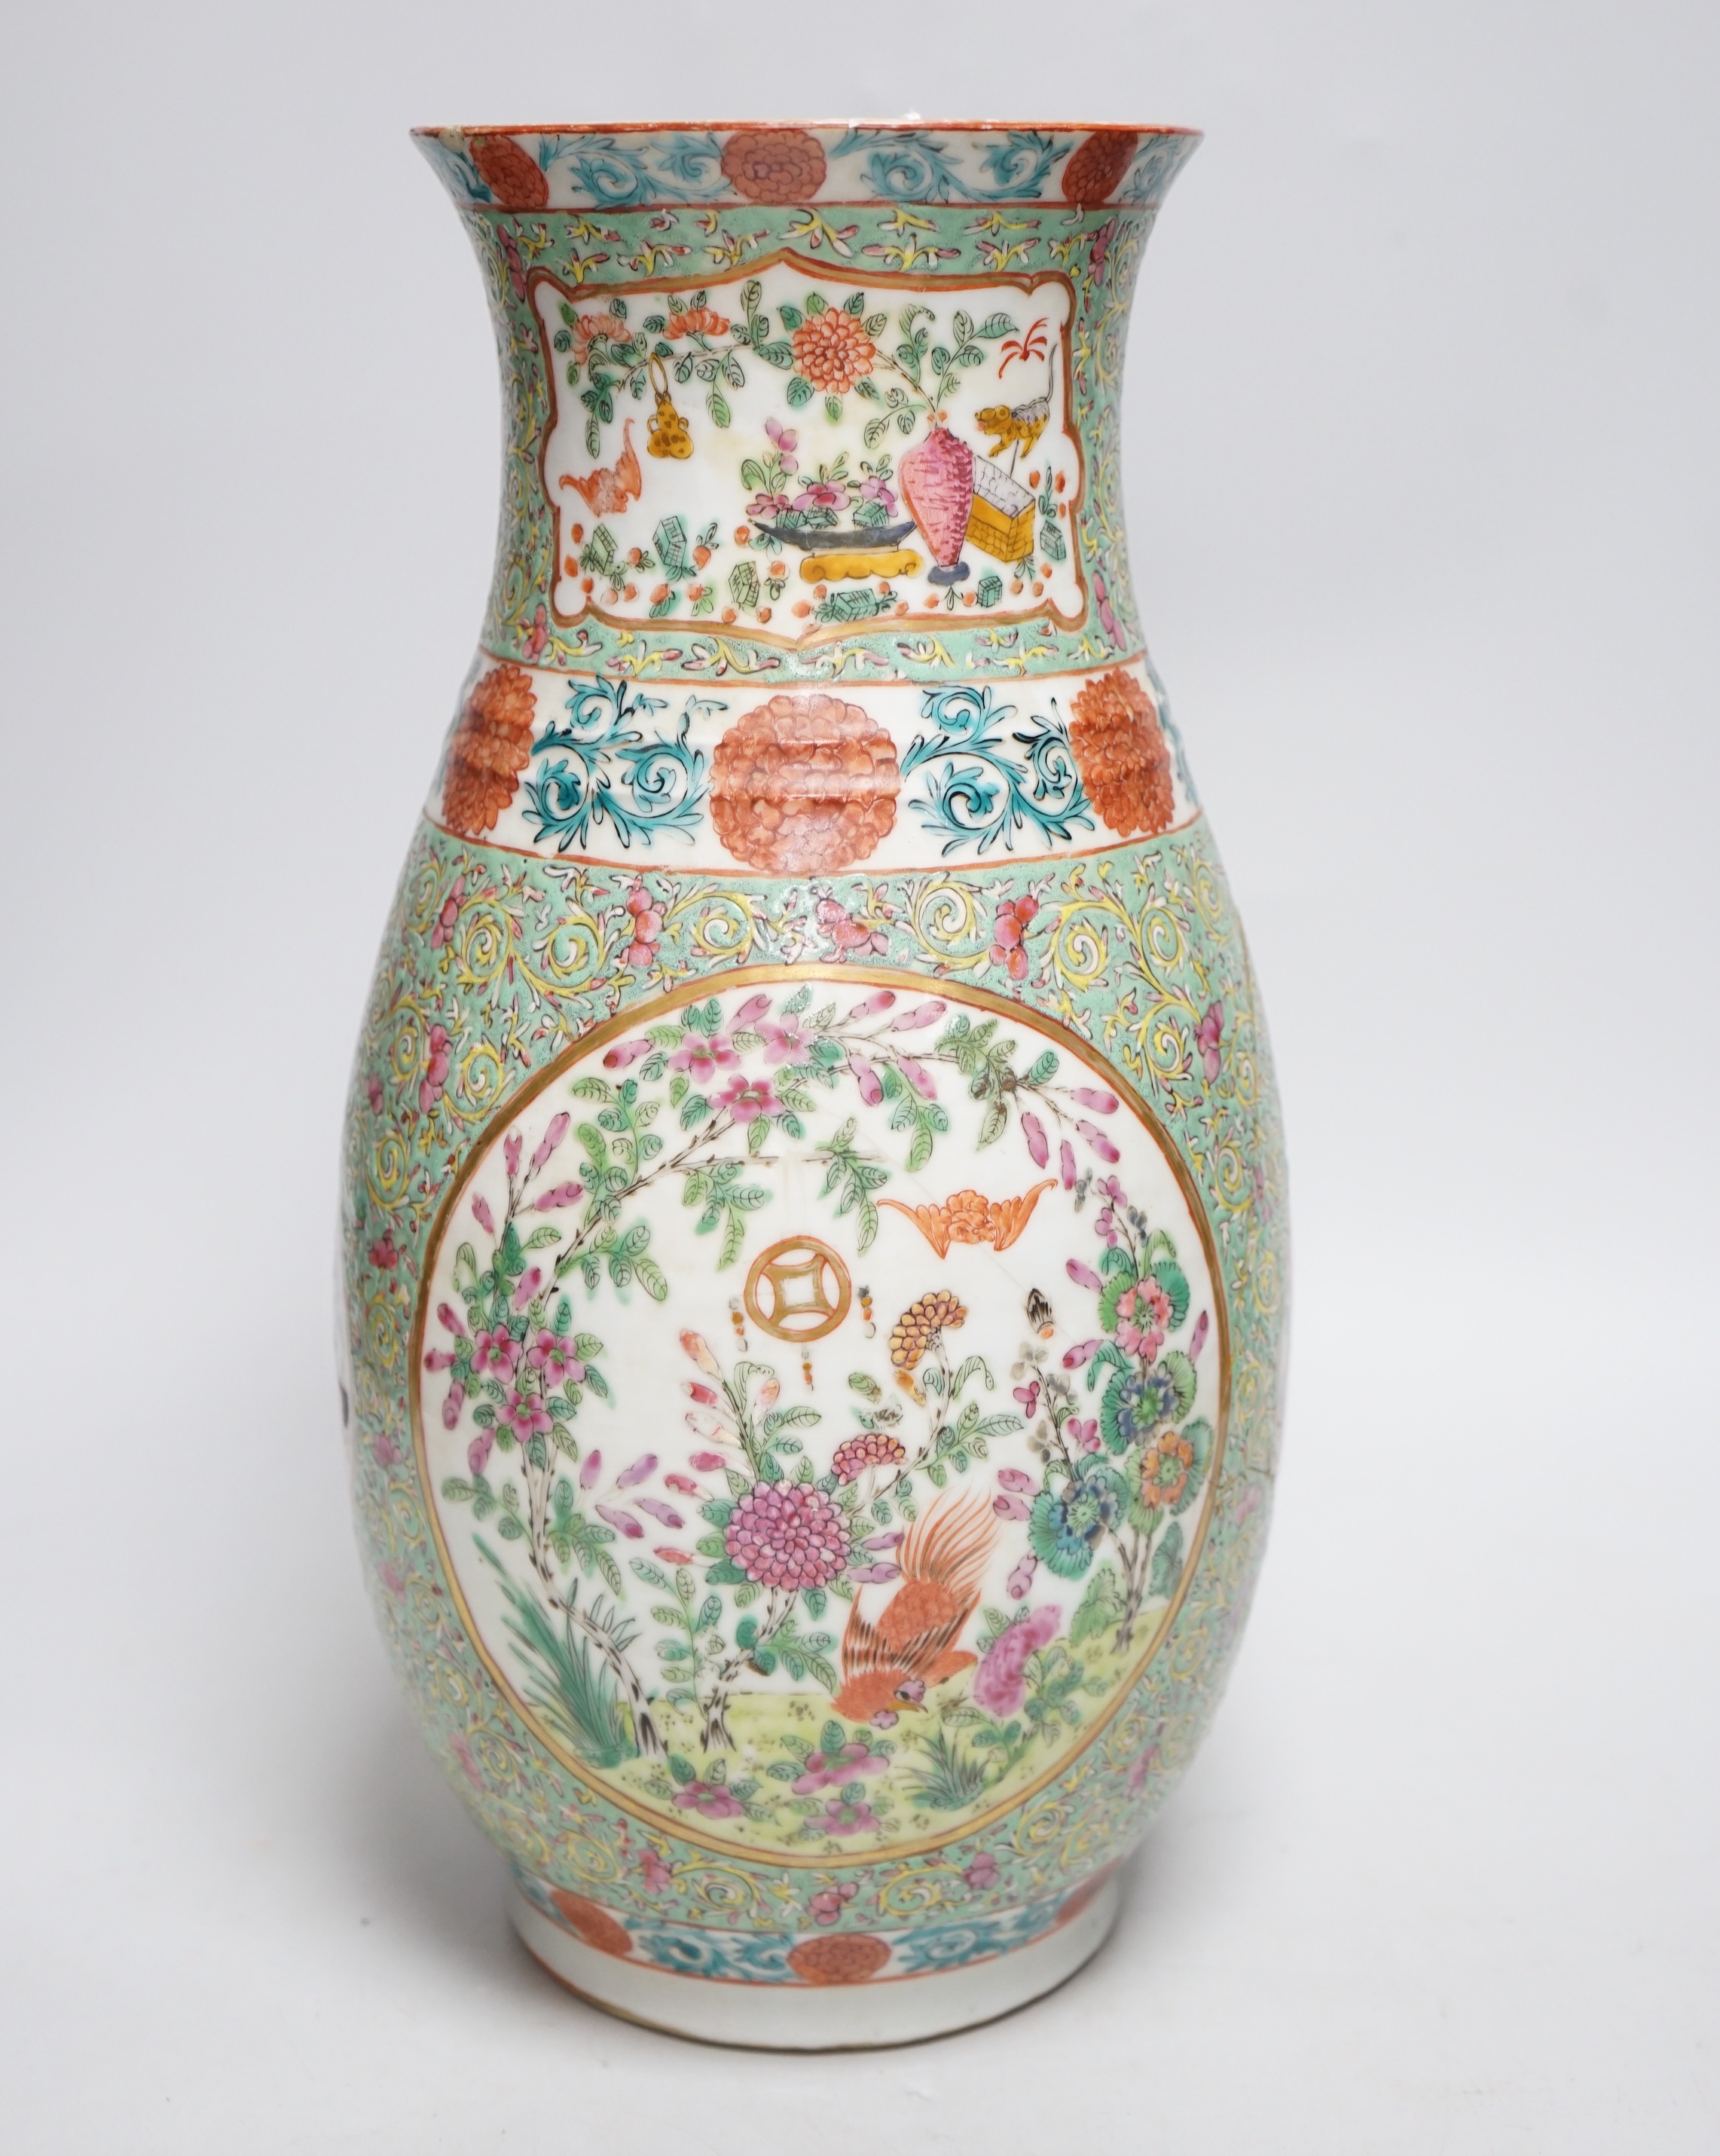 A 19th century Chinese enamelled porcelain vase on a green ground, 36.5cm